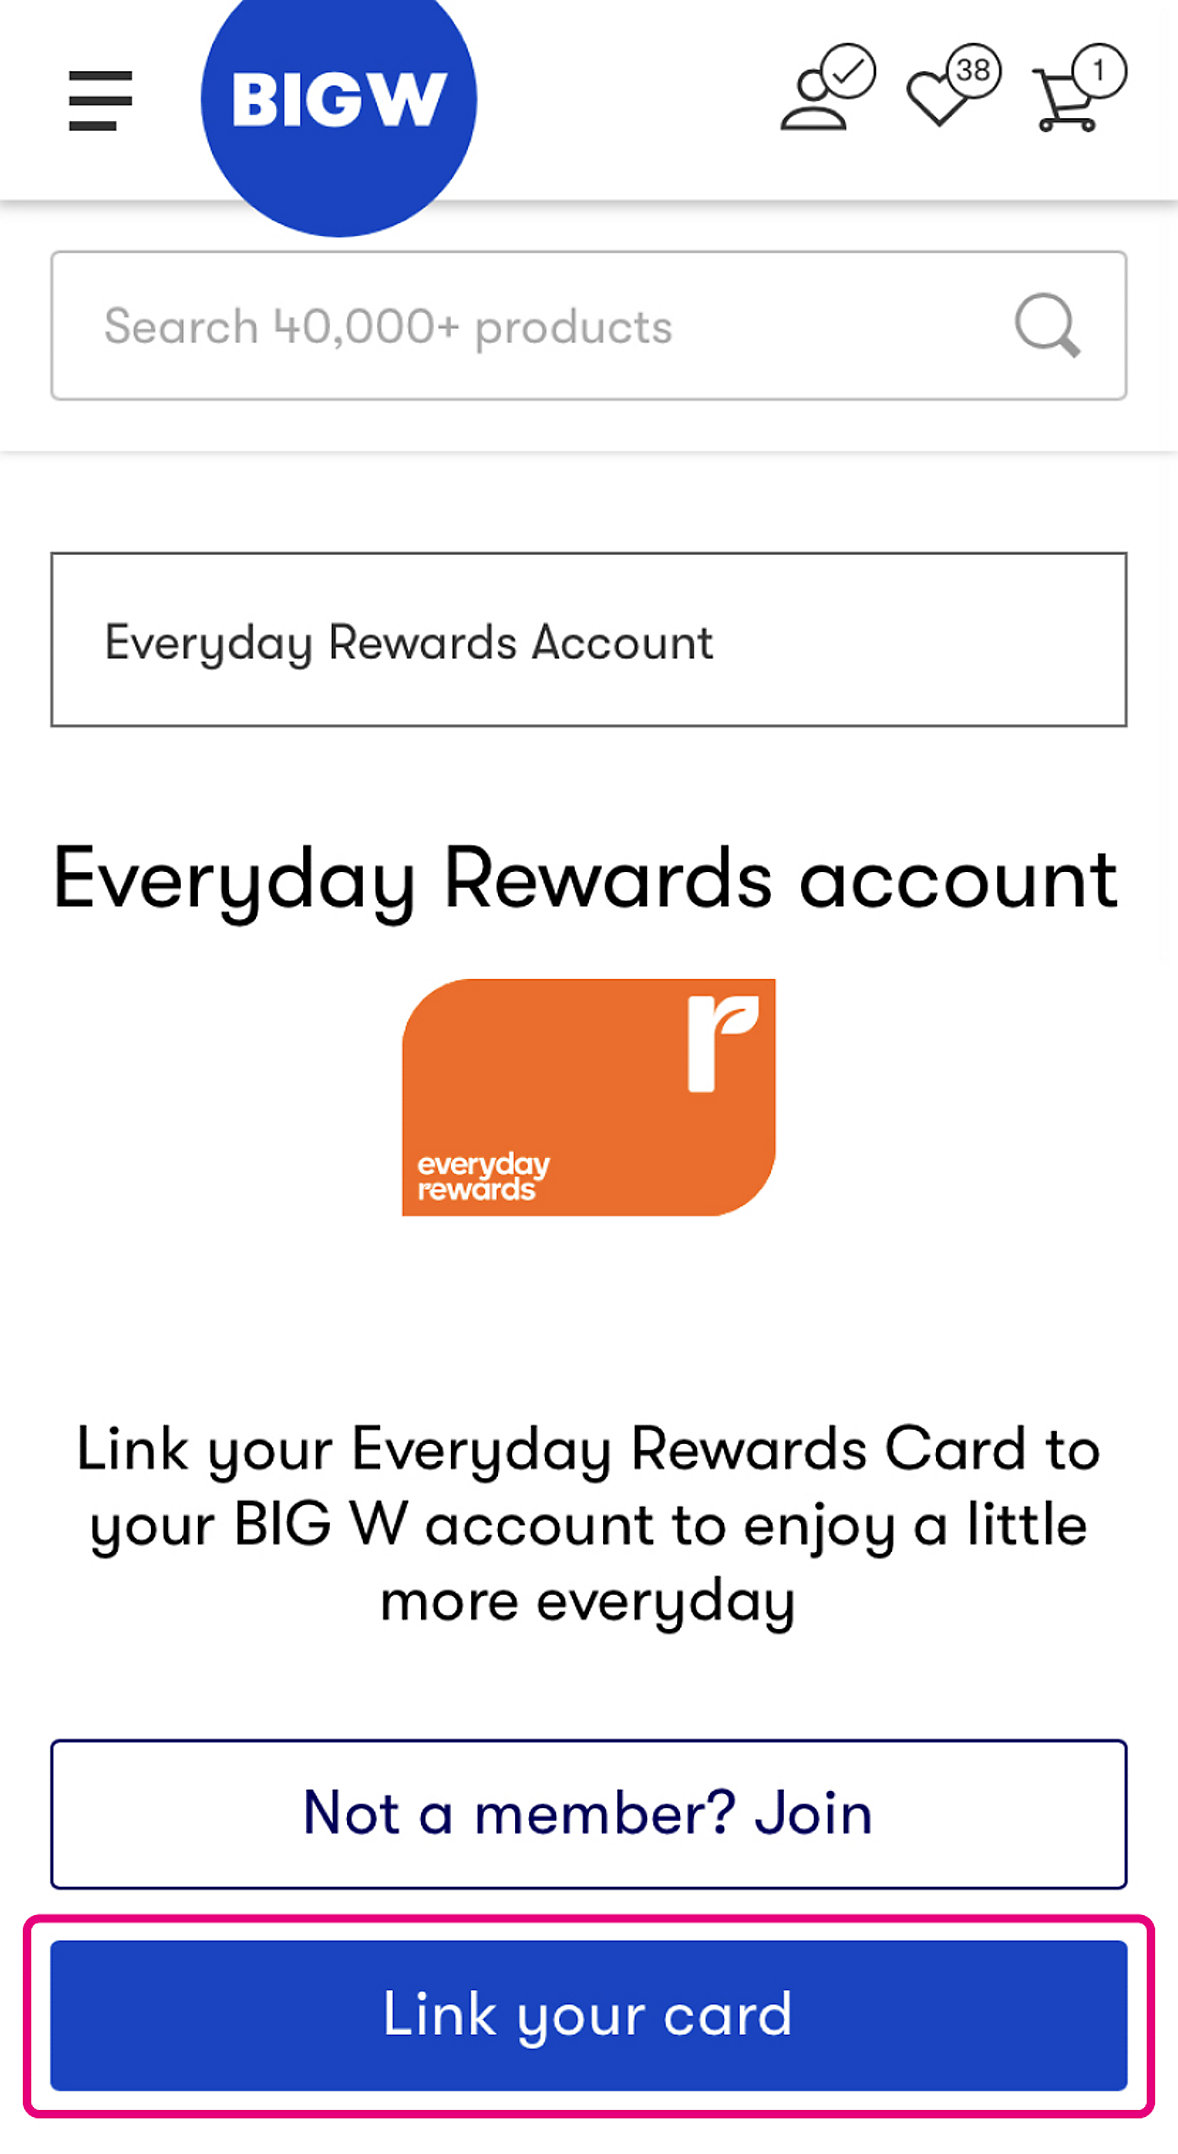 Linking your Everyday Rewards Card Step 2